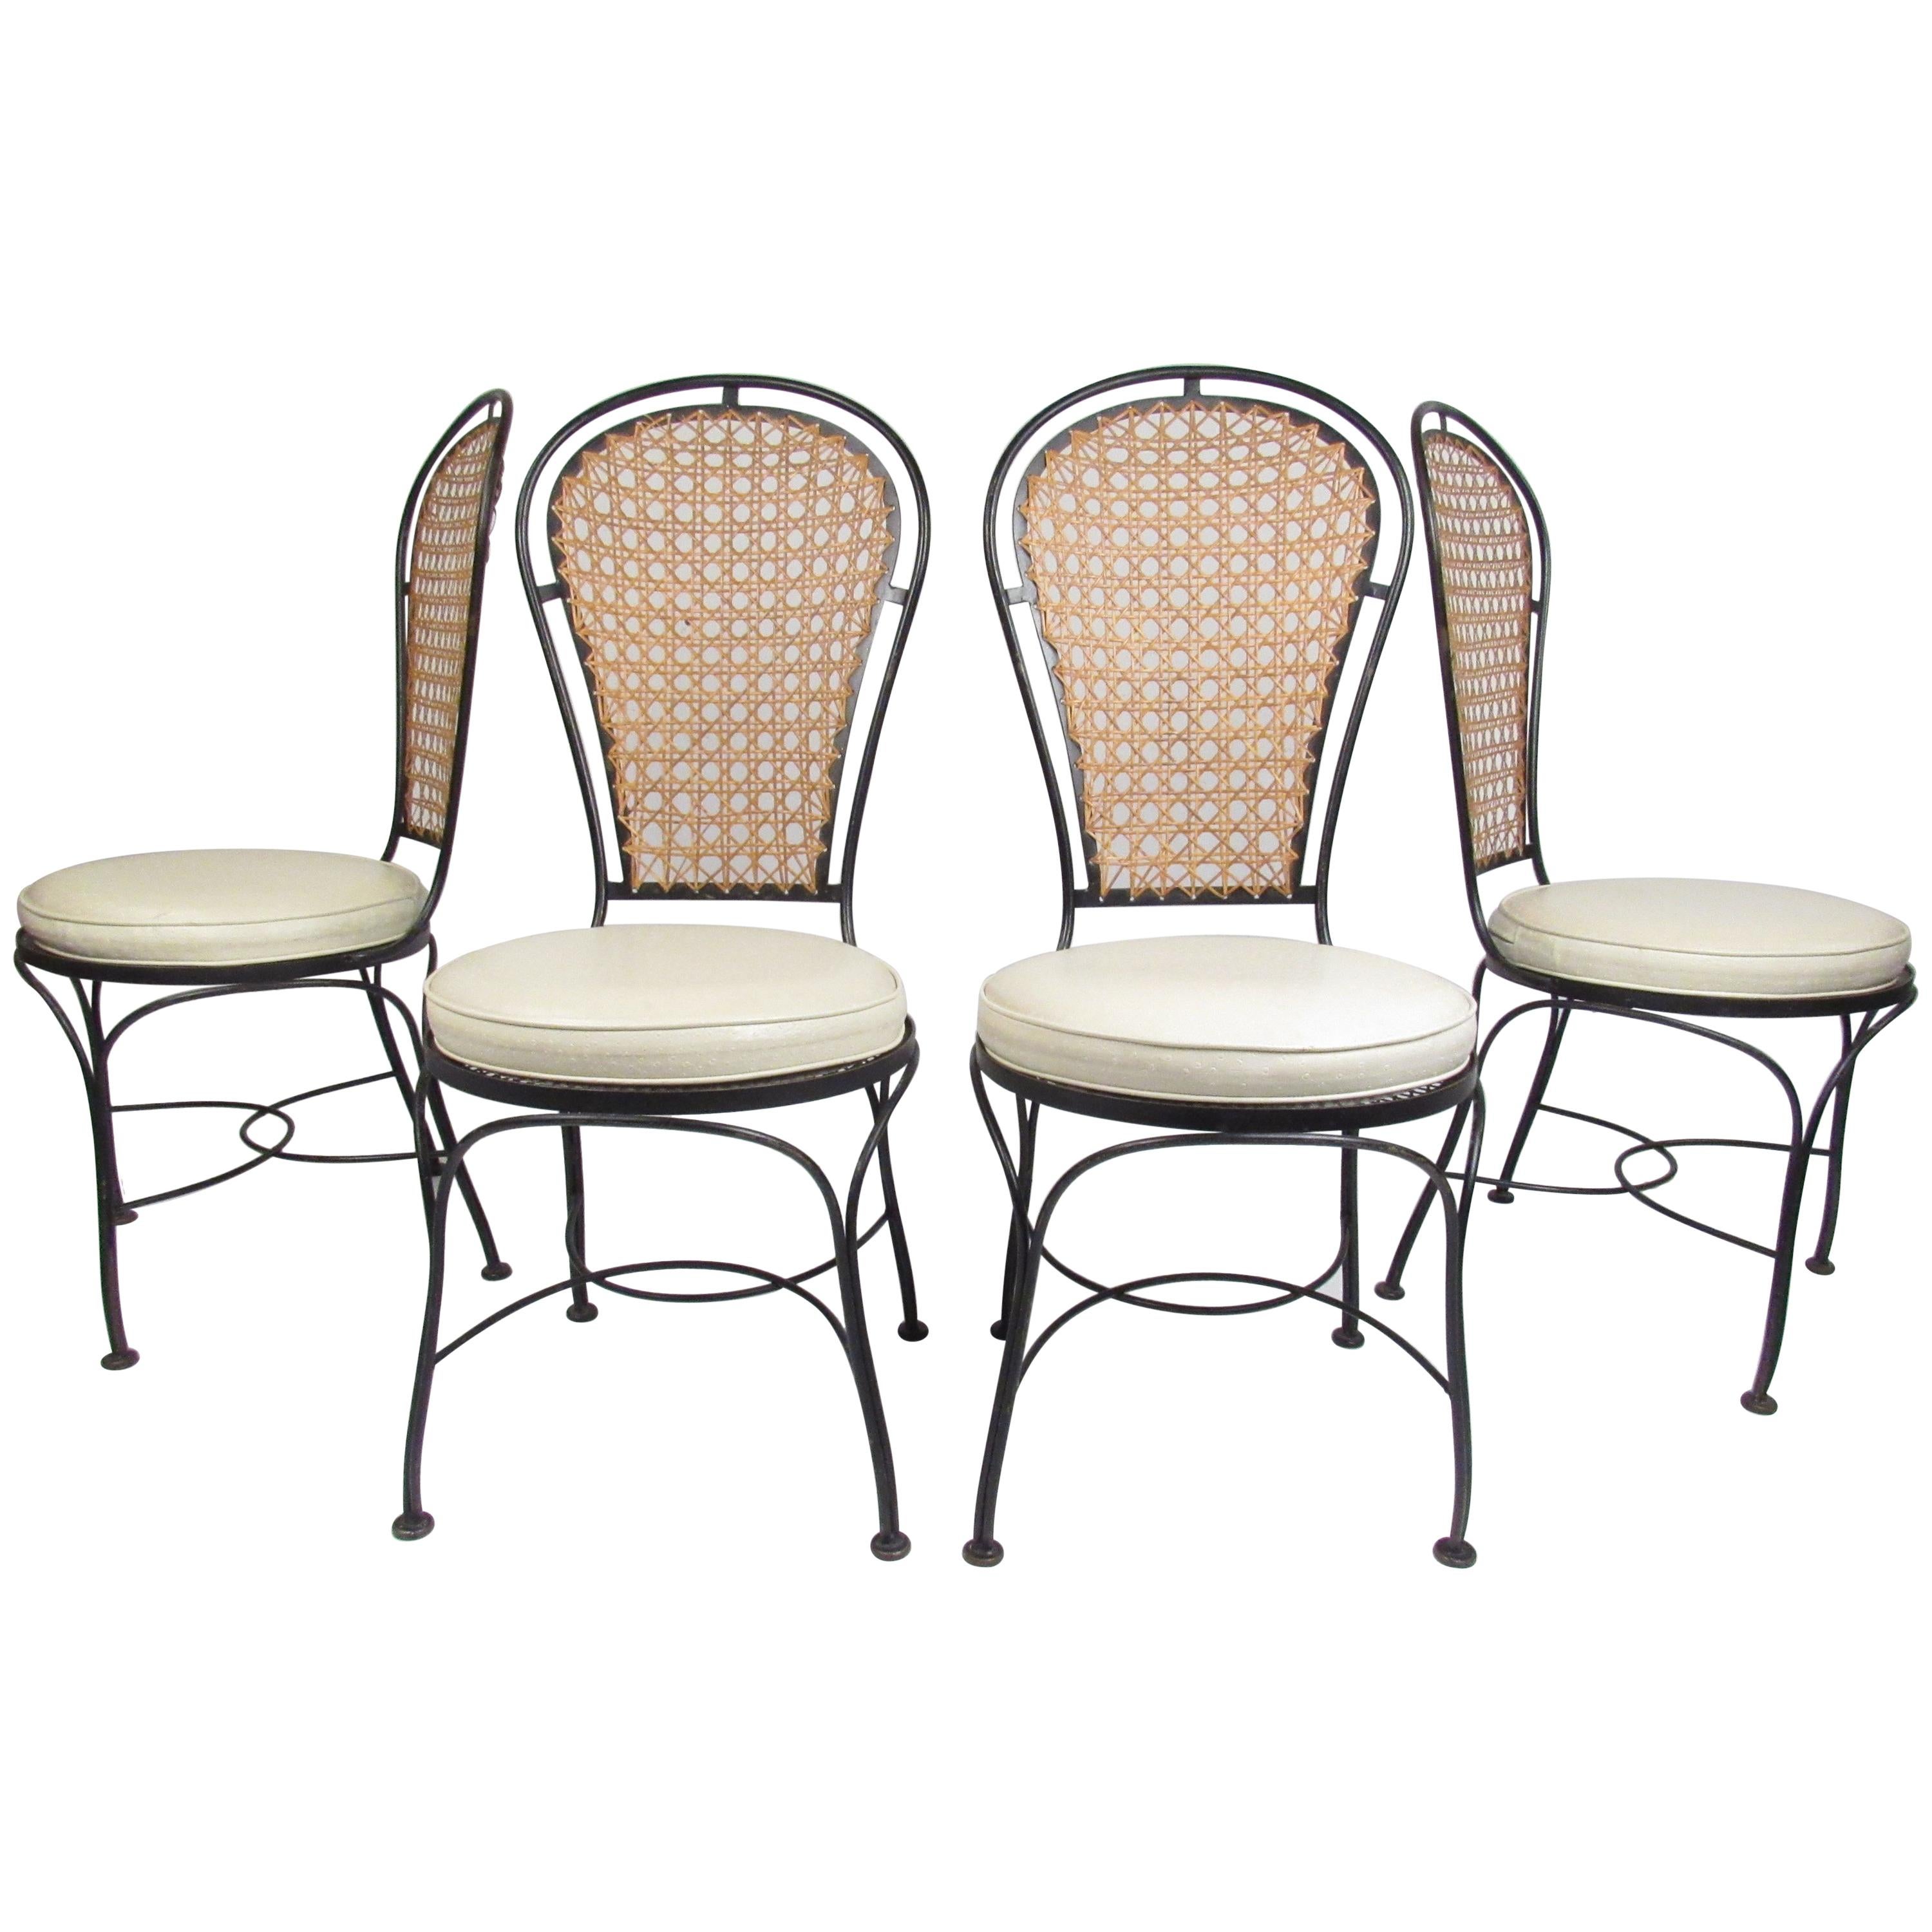 Set of Four Midcentury Wrought Iron Dining Chairs with a Cane Backrest